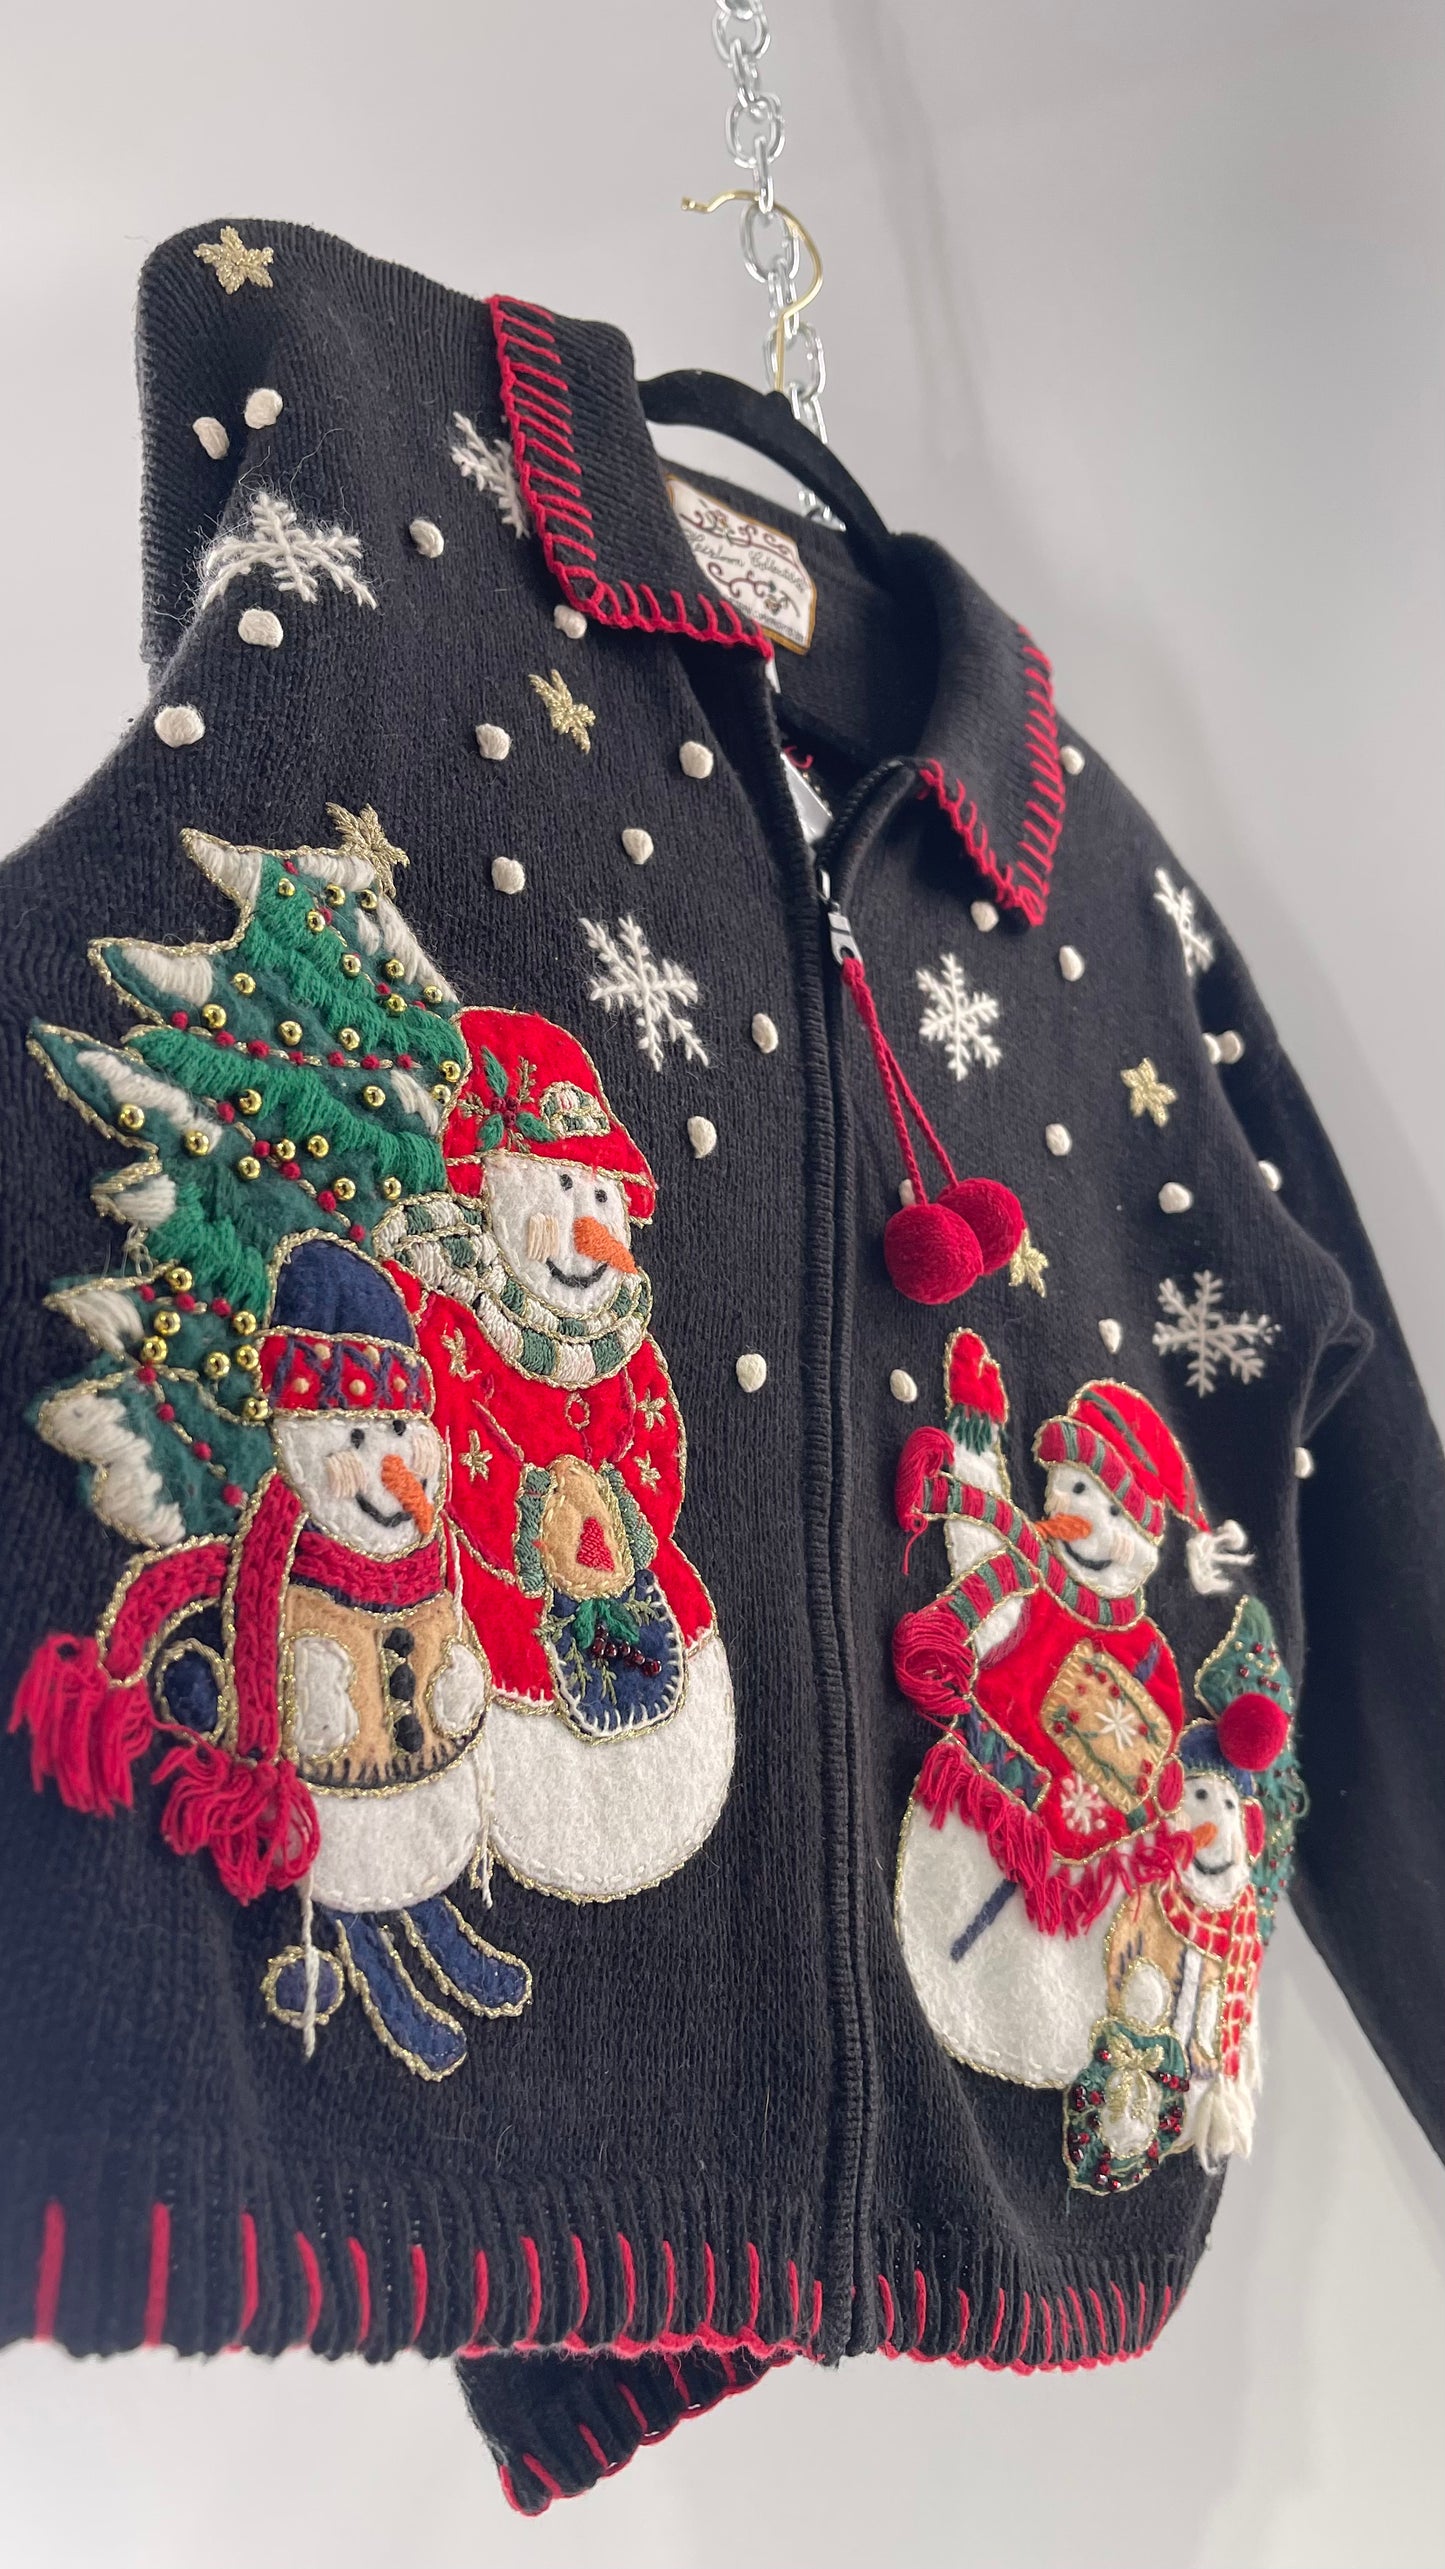 Vintage Reworked Urban Outfitters Heirloom Christmas Cardigan with Festive Snowmen Embroidery, Snowflakes, Christmas Tree and PomPom Zipper Detail  (S)